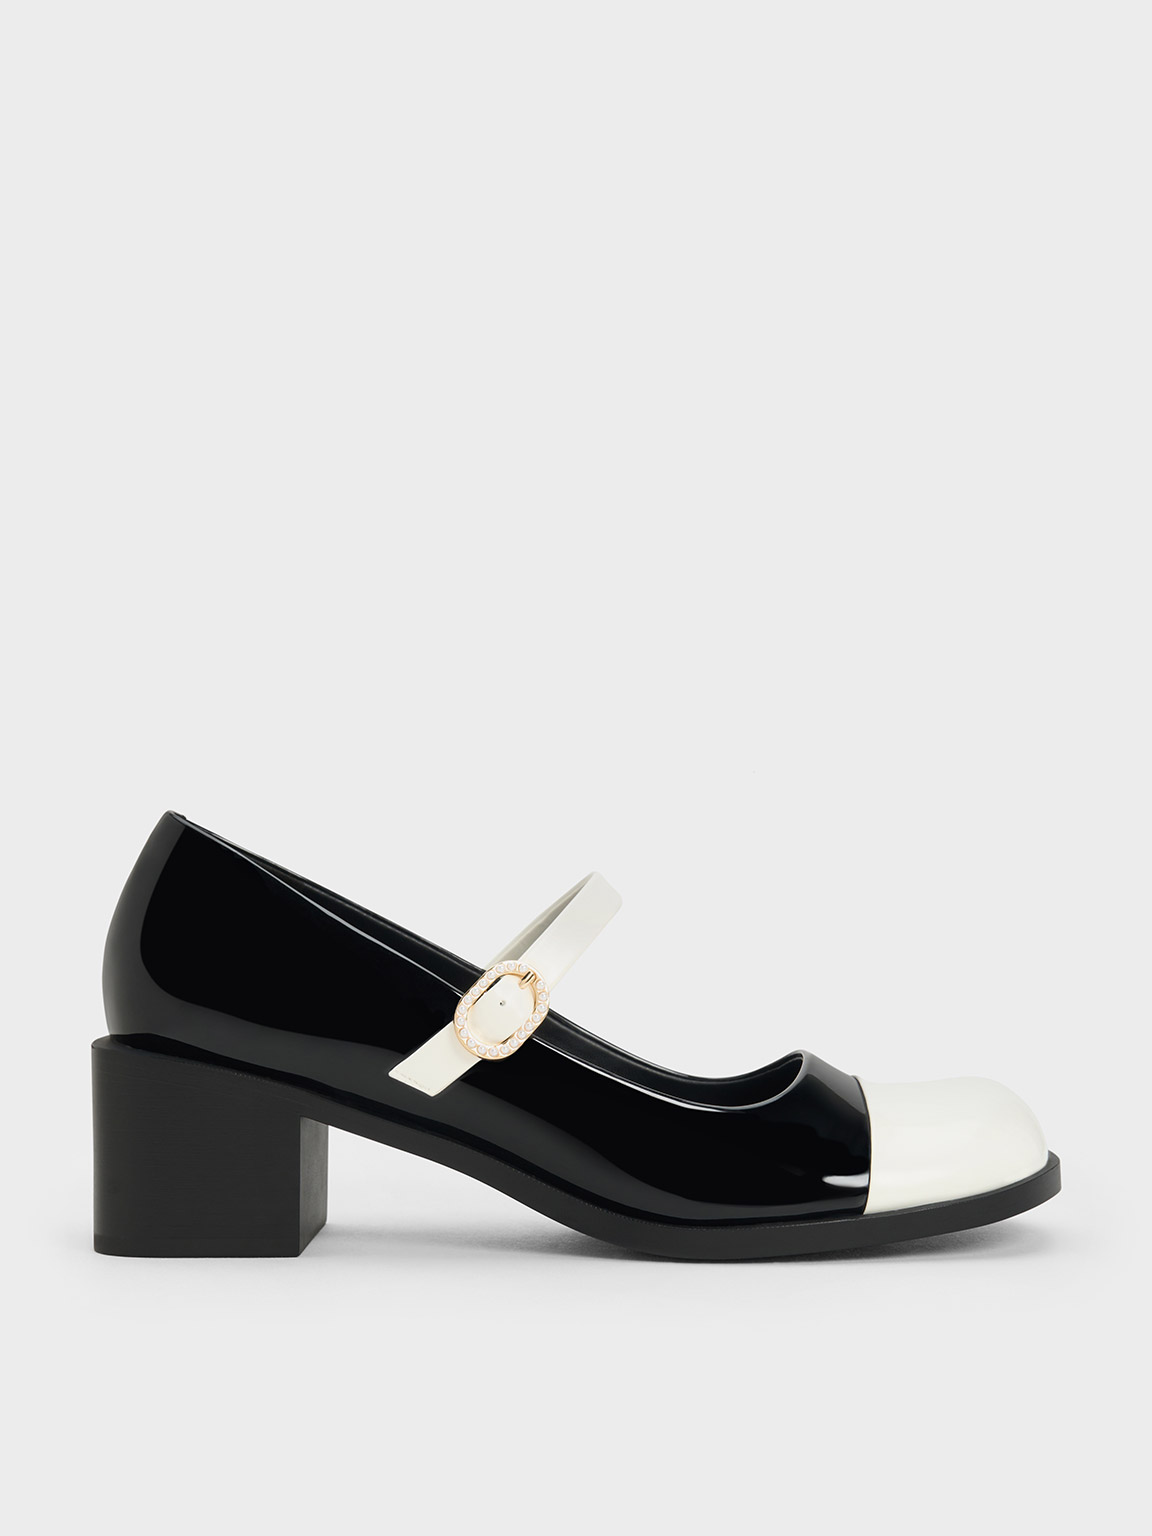 Black Patent Patent Crystal-Embellished Buckle Two-Tone Mary Janes | CHARLES & KEITH